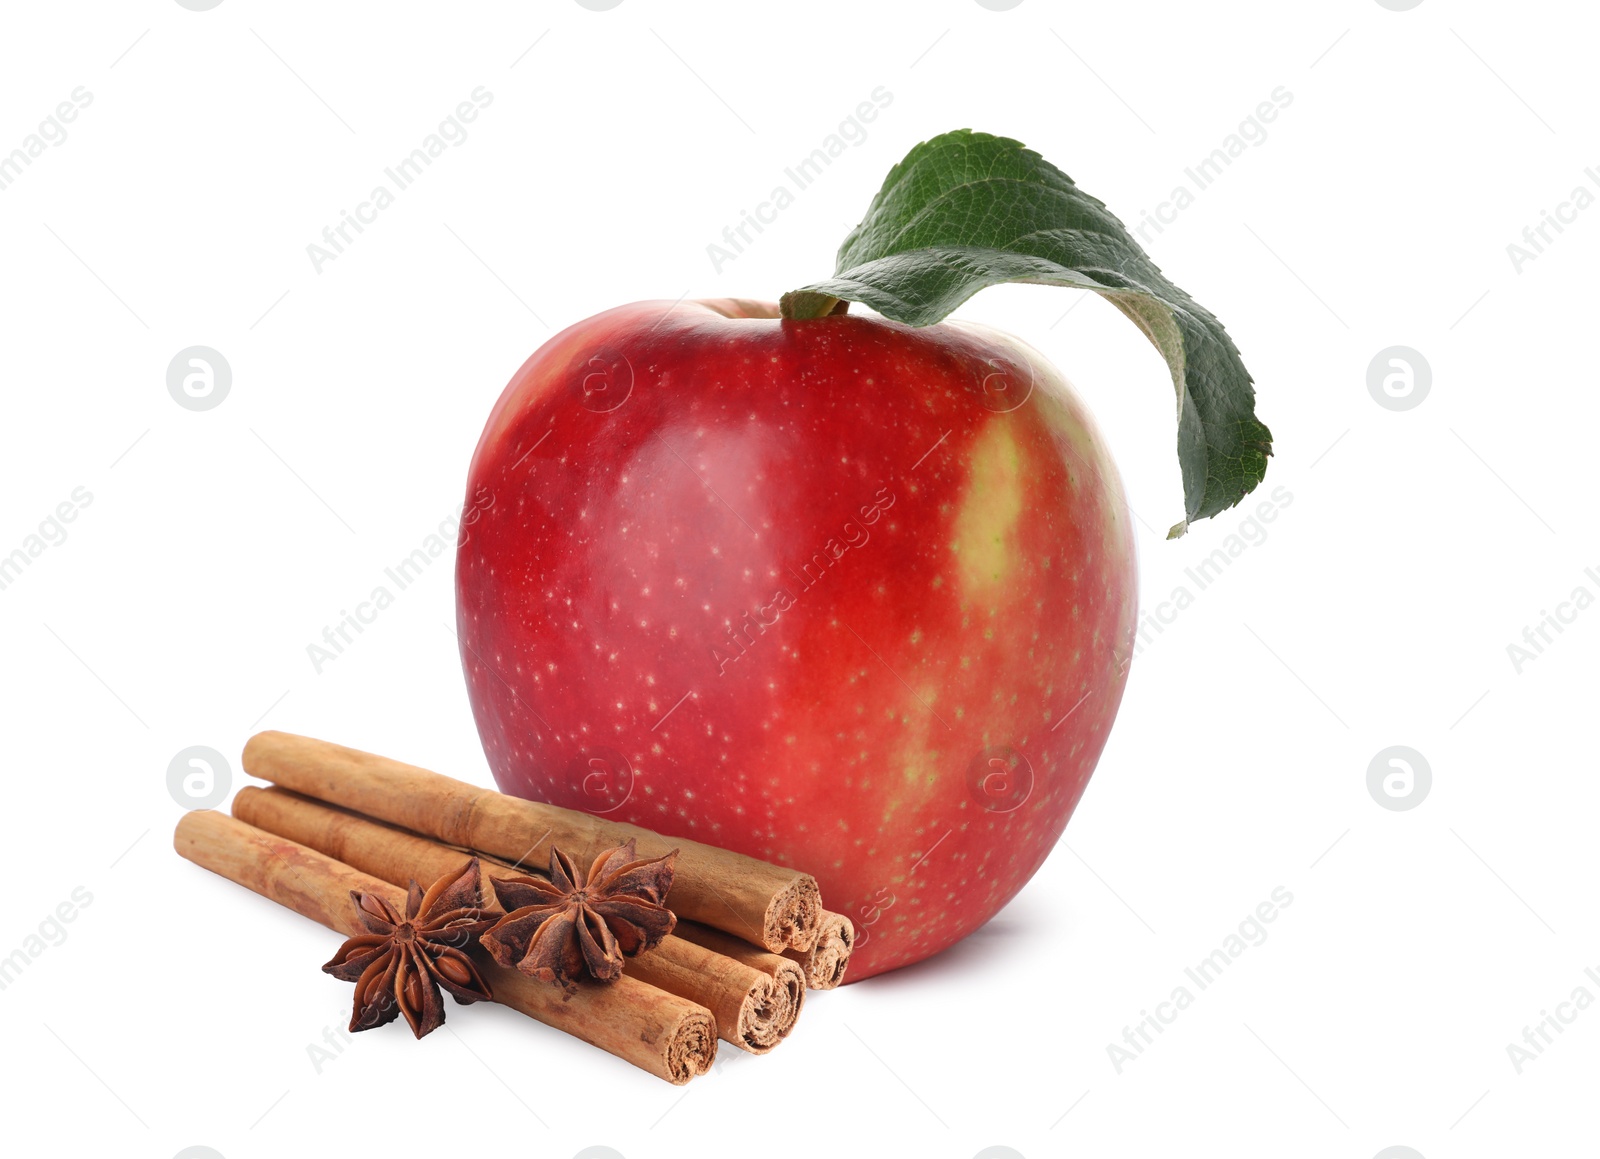 Image of Aromatic cinnamon sticks, anise stars and red apple isolated on white